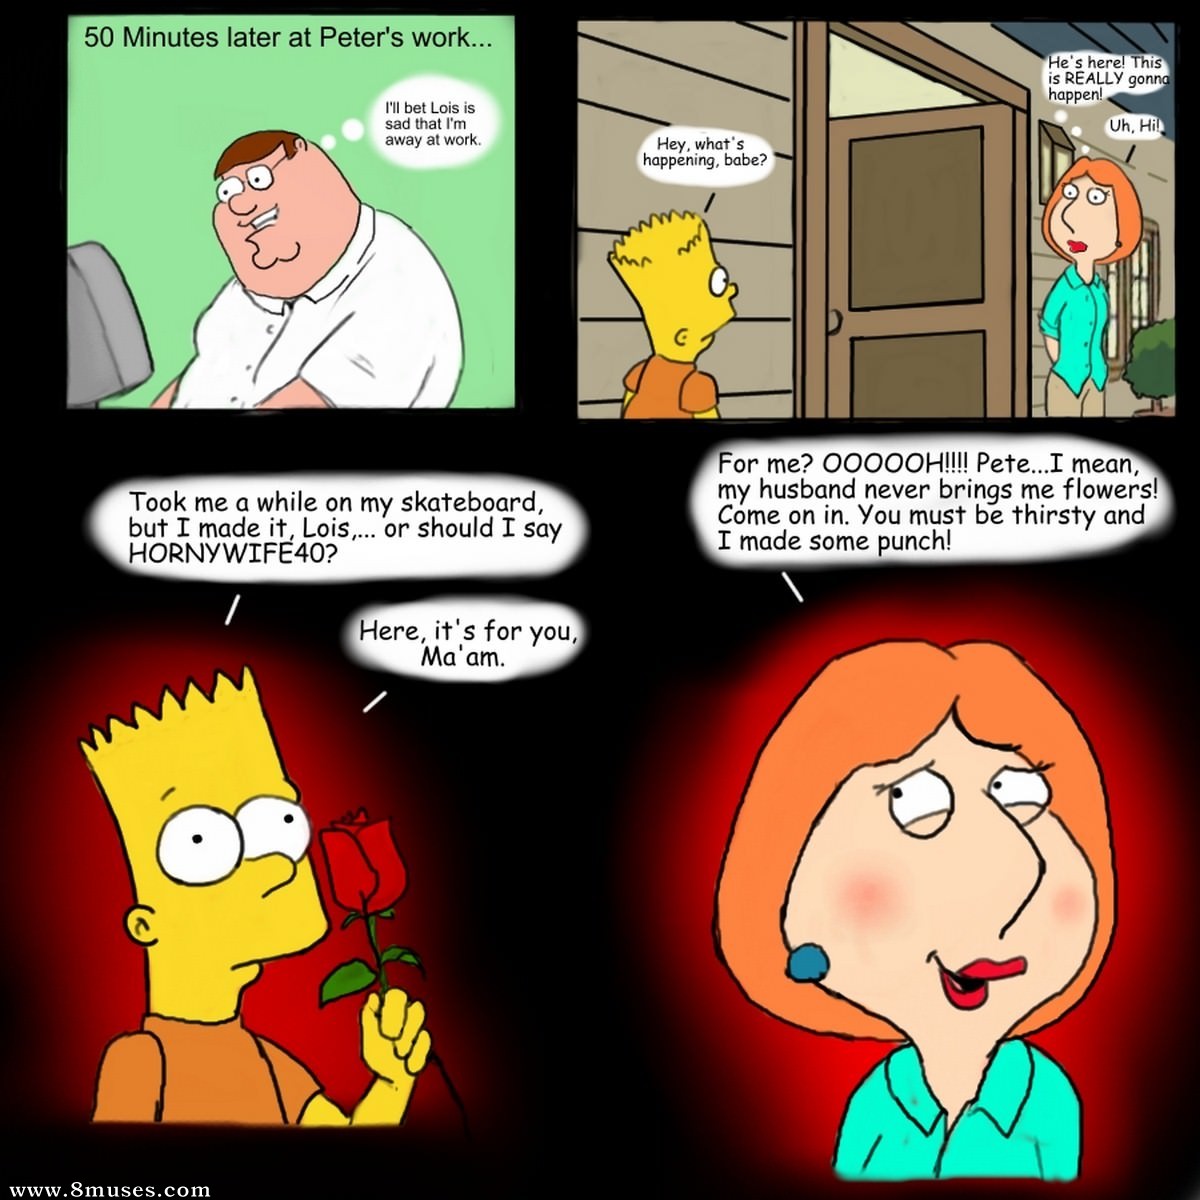 Family Guy Porn Comic Strips - Family Guy Bart simpson and Lois Griffin fucking Issue 1 - 8muses Comics -  Sex Comics and Porn Cartoons